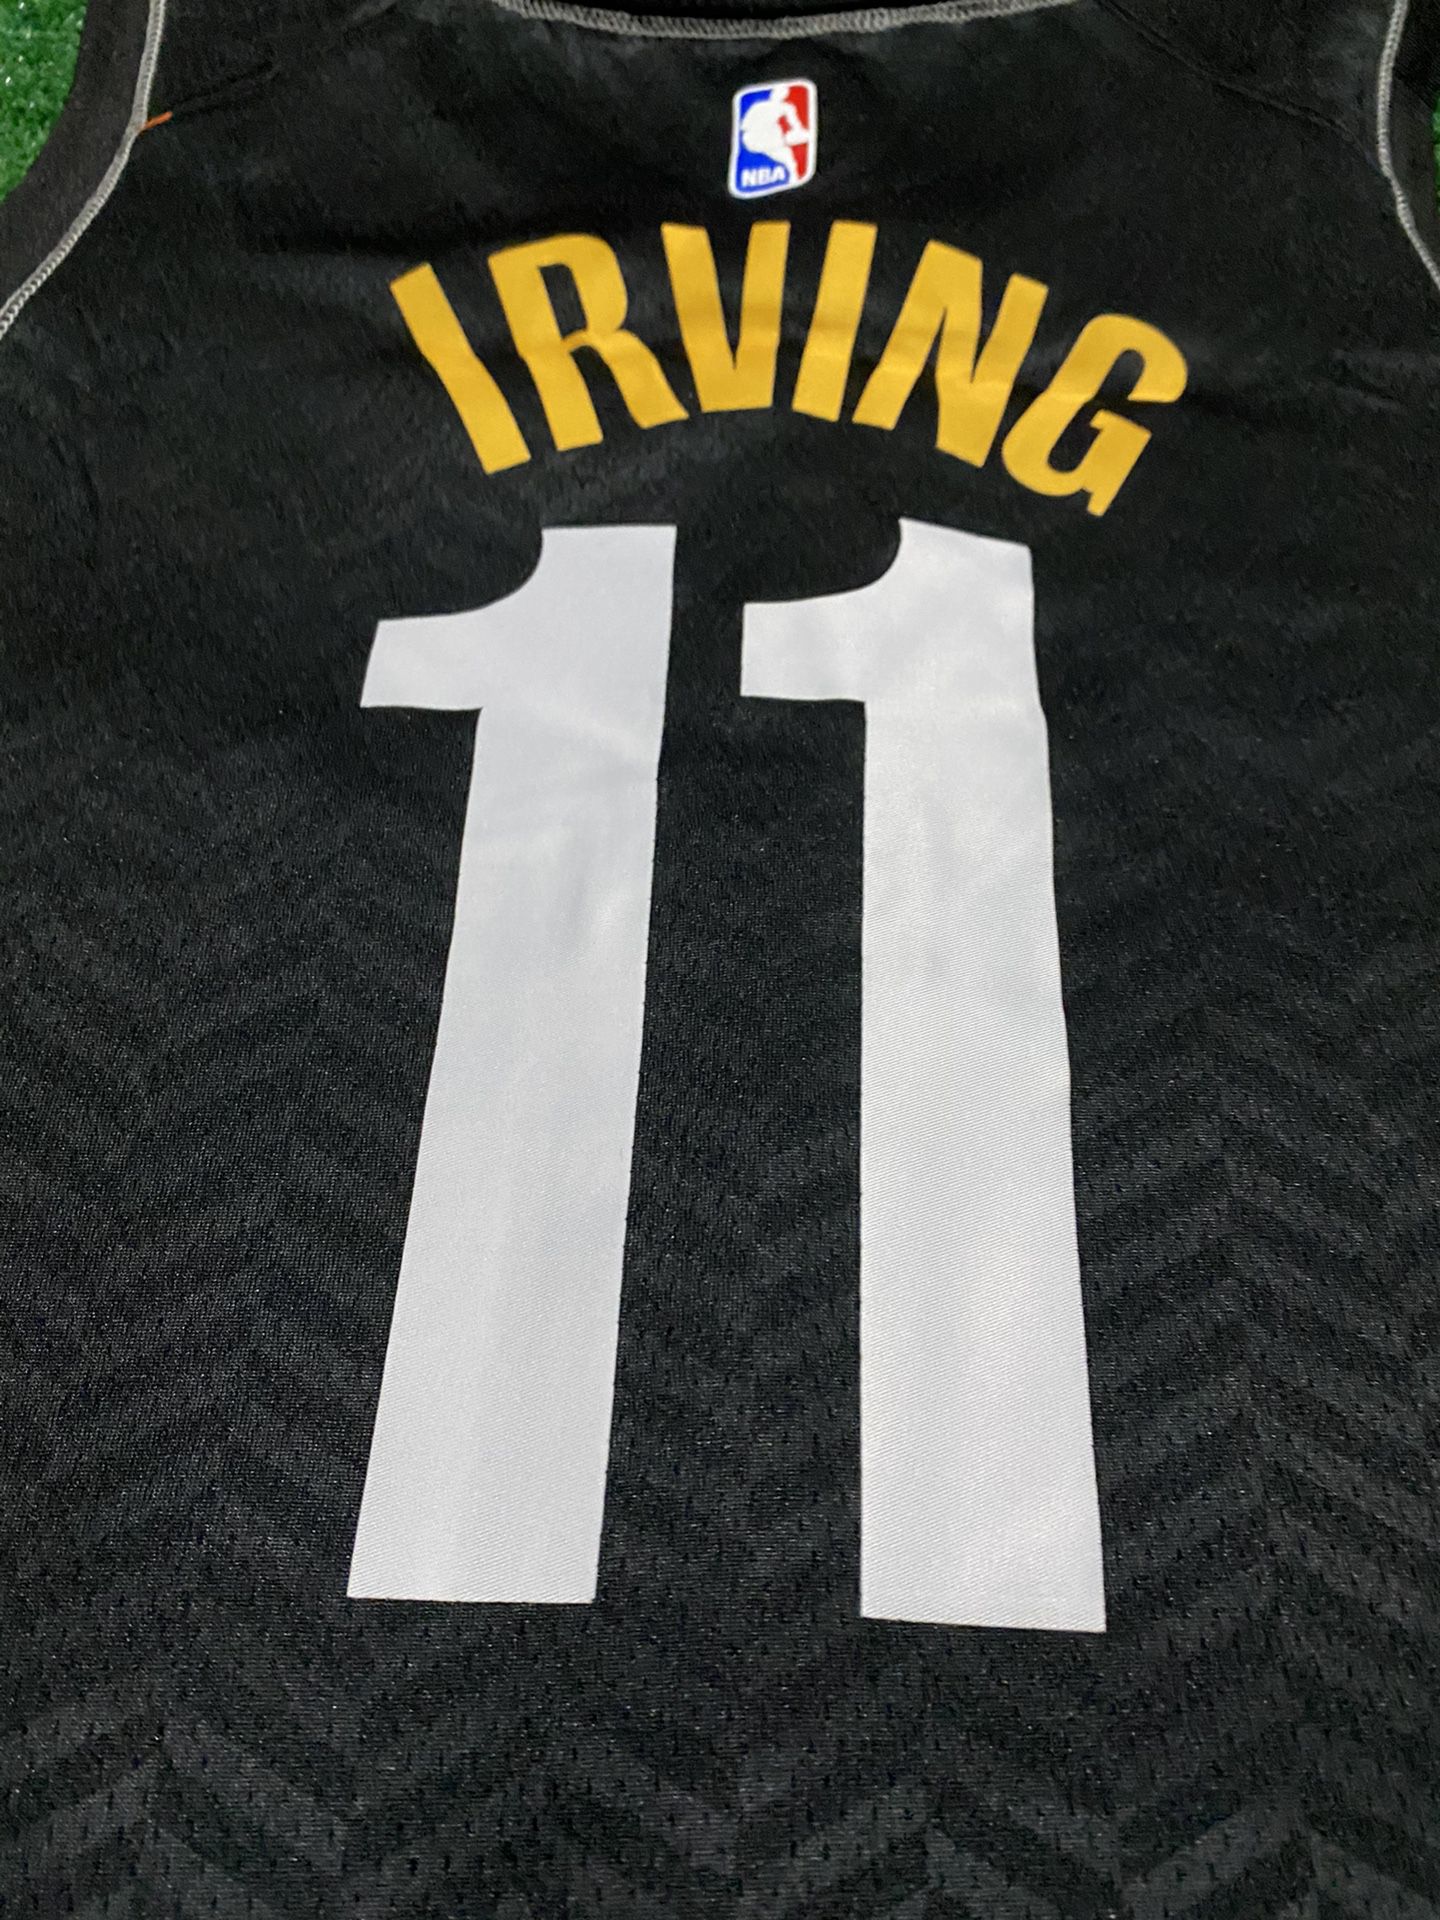 Kyrie Irving Brooklyn Nets Game-Used #11 White Jersey vs. New York Knicks  on April 6 2022 - Size 50+4